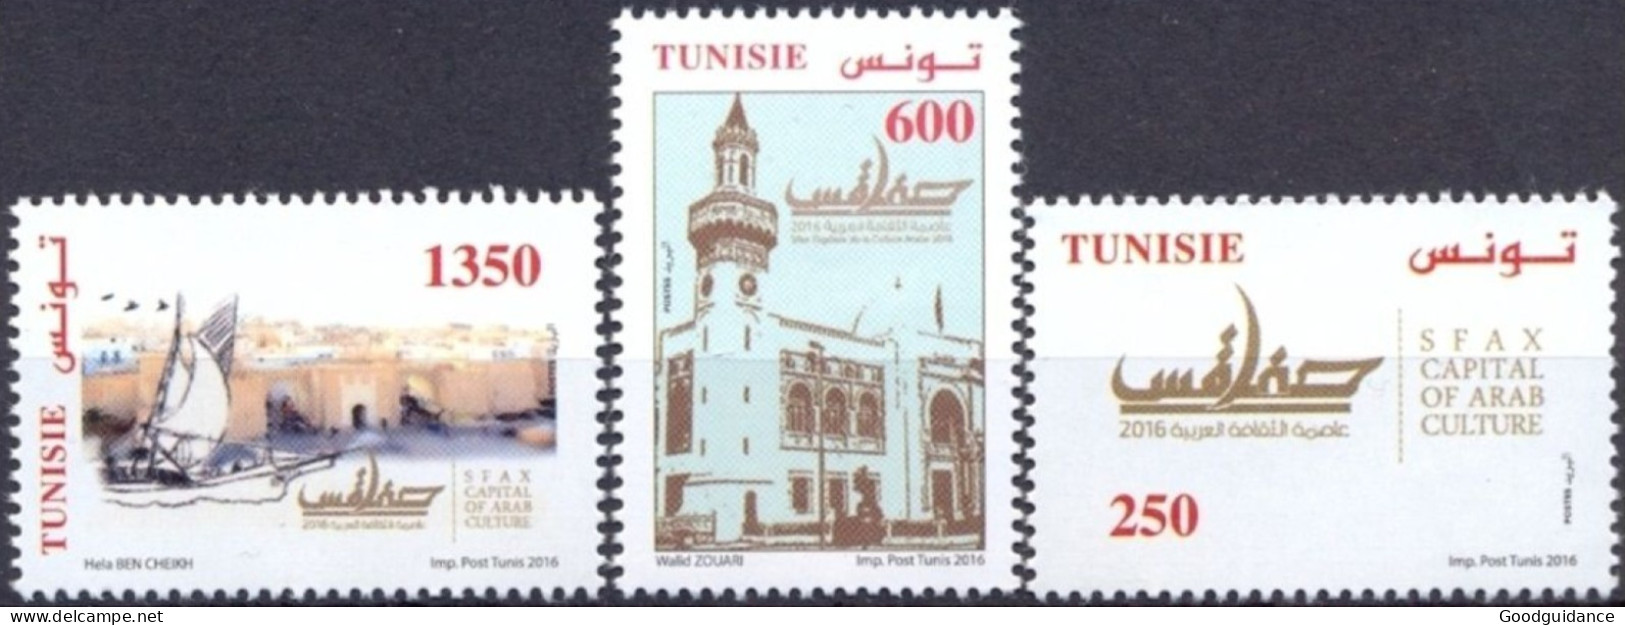 2016- Tunisia- Sfax Capital Of Arab Culture 2016- Mosque- Calligraphy - Boats - Complete 3V. MNH** - Mosques & Synagogues